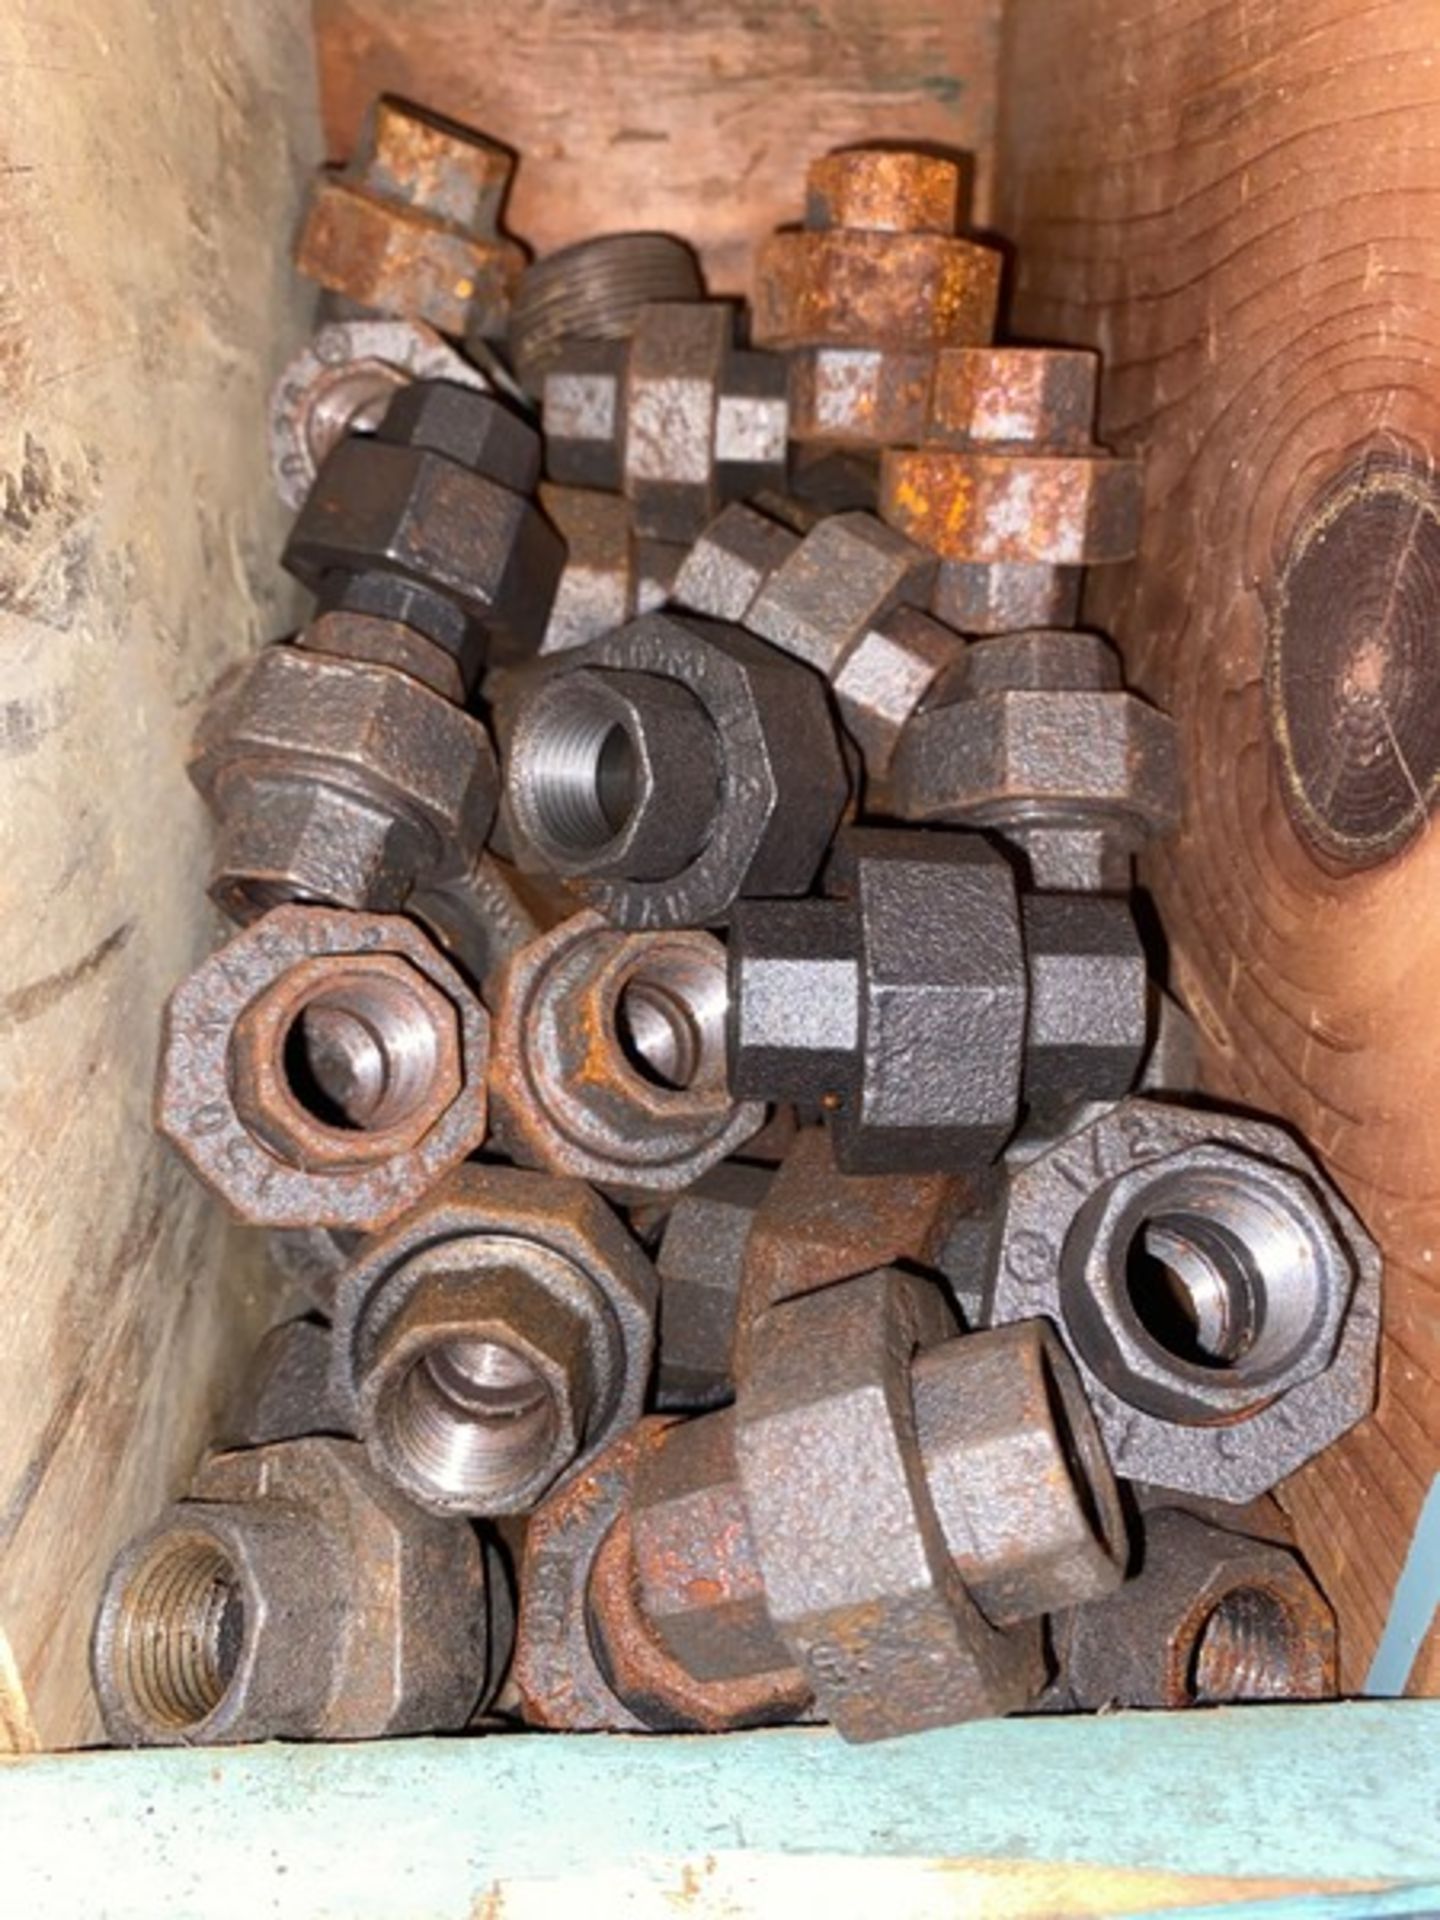 1/2” Union Fitting; 1/2” Coupling Fittings; 1/2” Caps; 3/8”. Caps (LOCATED IN MONROEVILLE, PA)